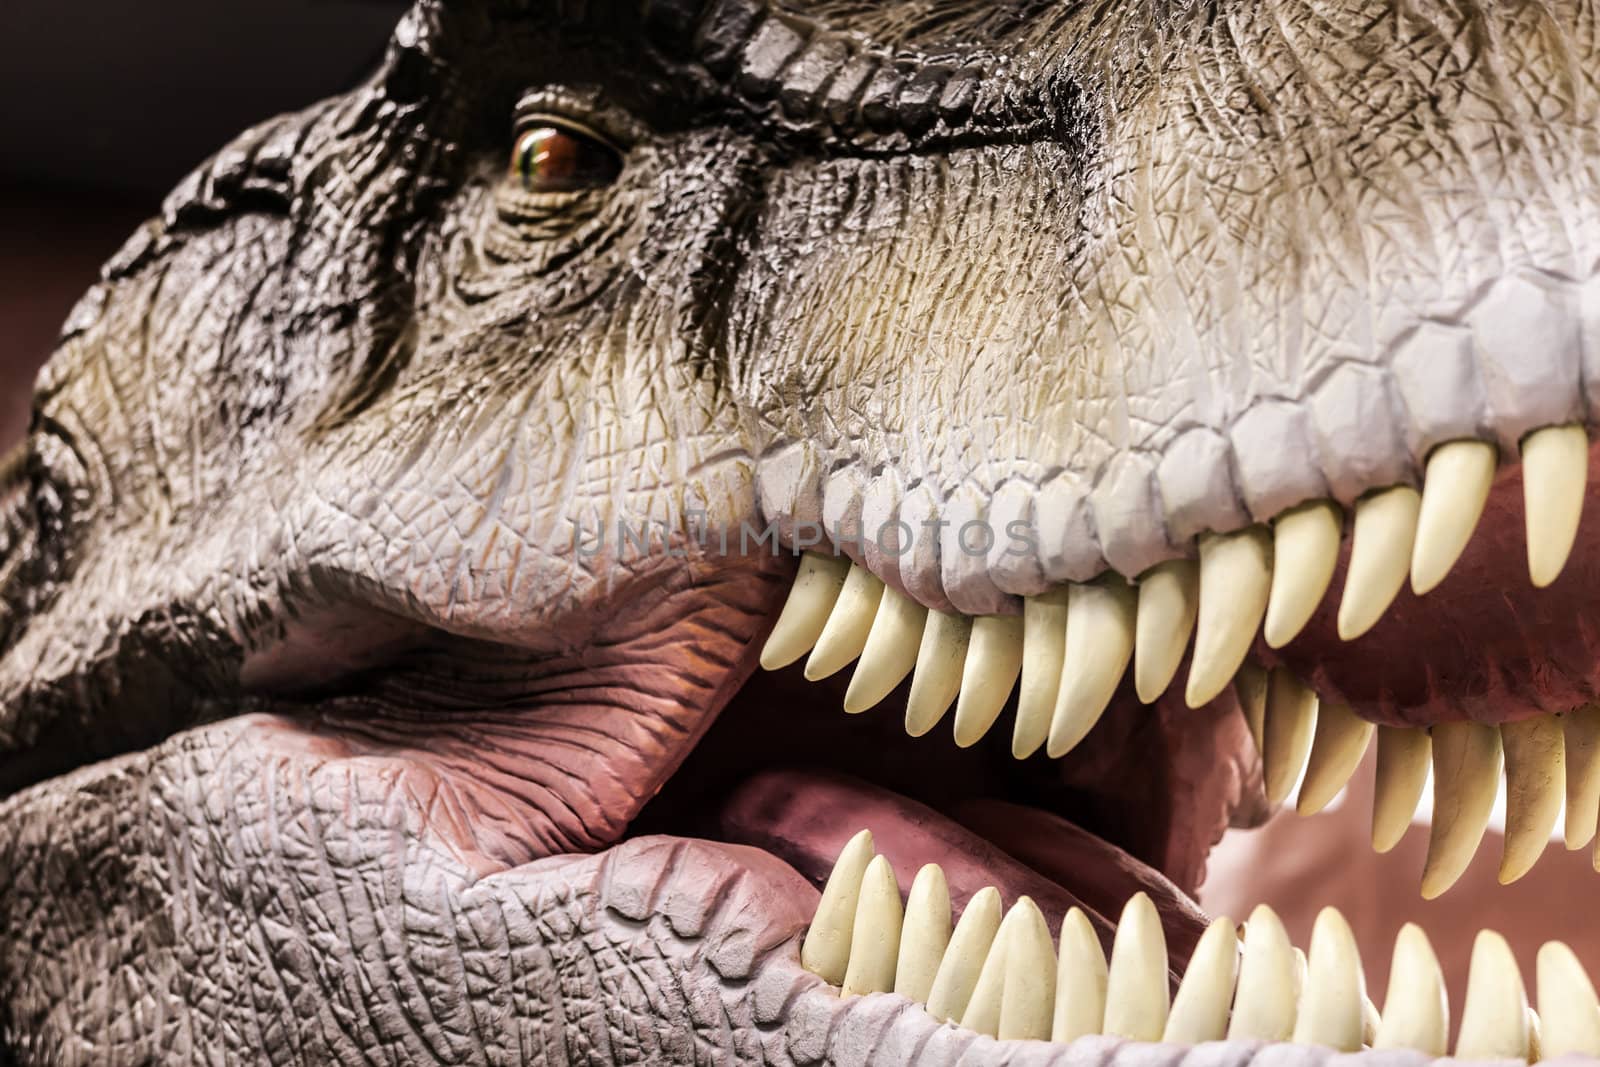 Tyrannosaurus showing his toothy mouth by ia_64